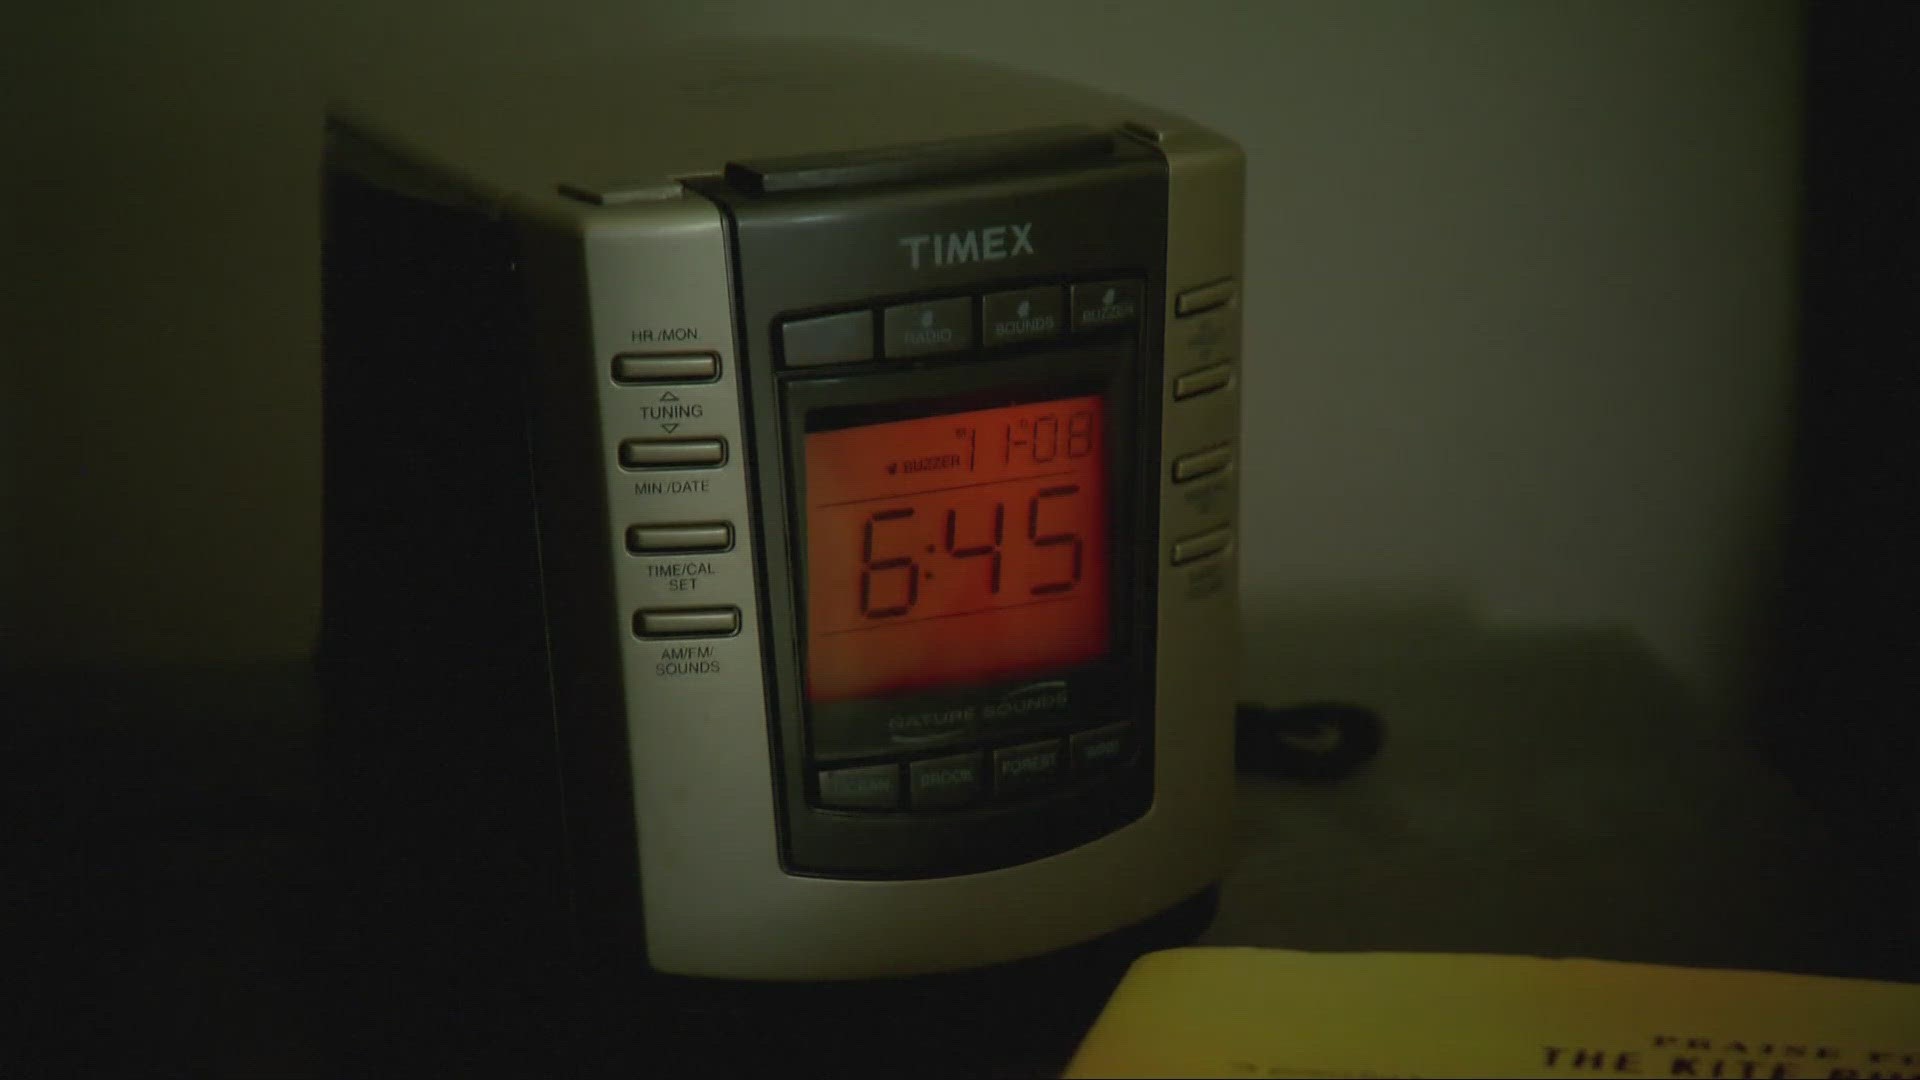 Daylight saving time begins this weekend, meaning we'll lose an hour of sleep.